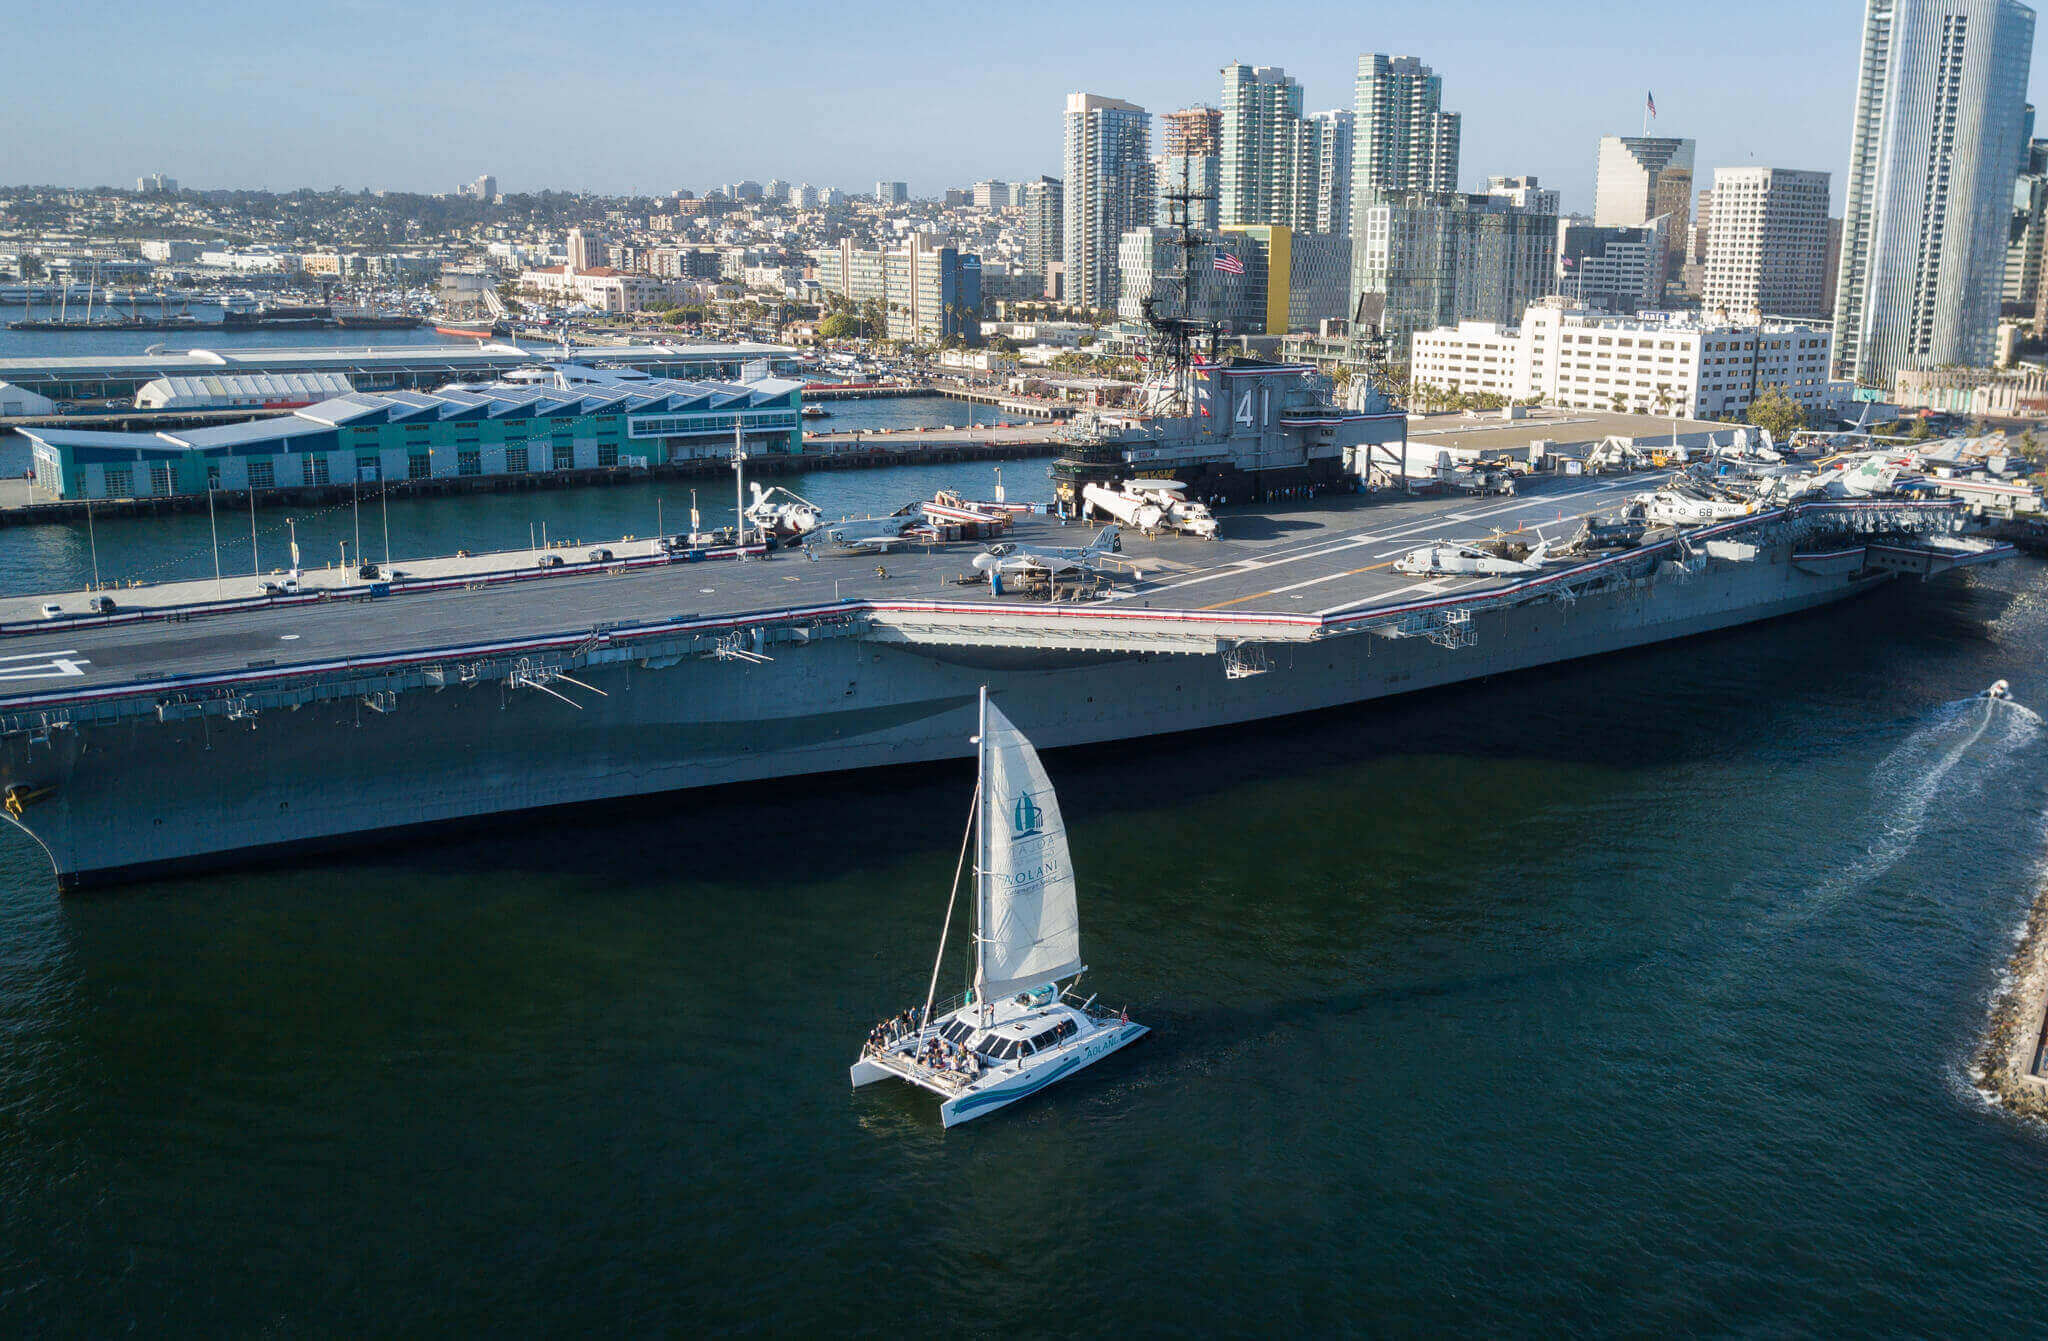 san diego yacht rentals for parties